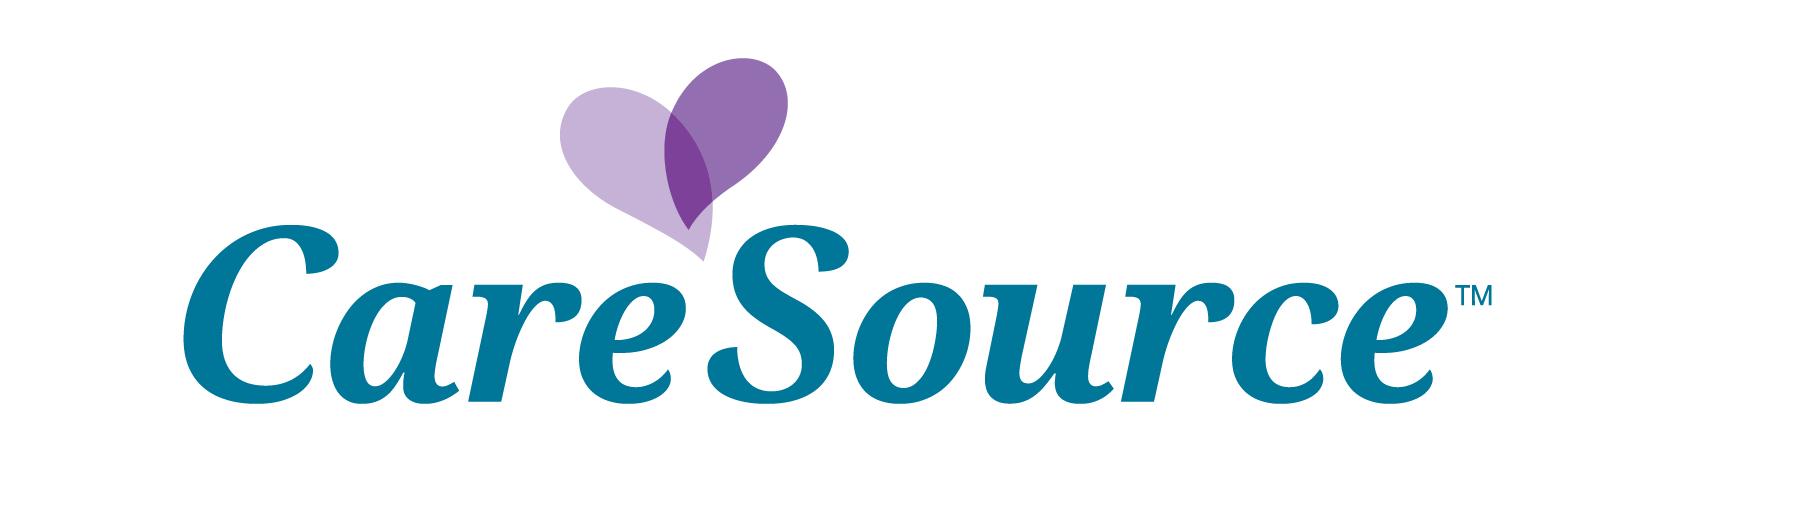 caresource silver indiana high deductible